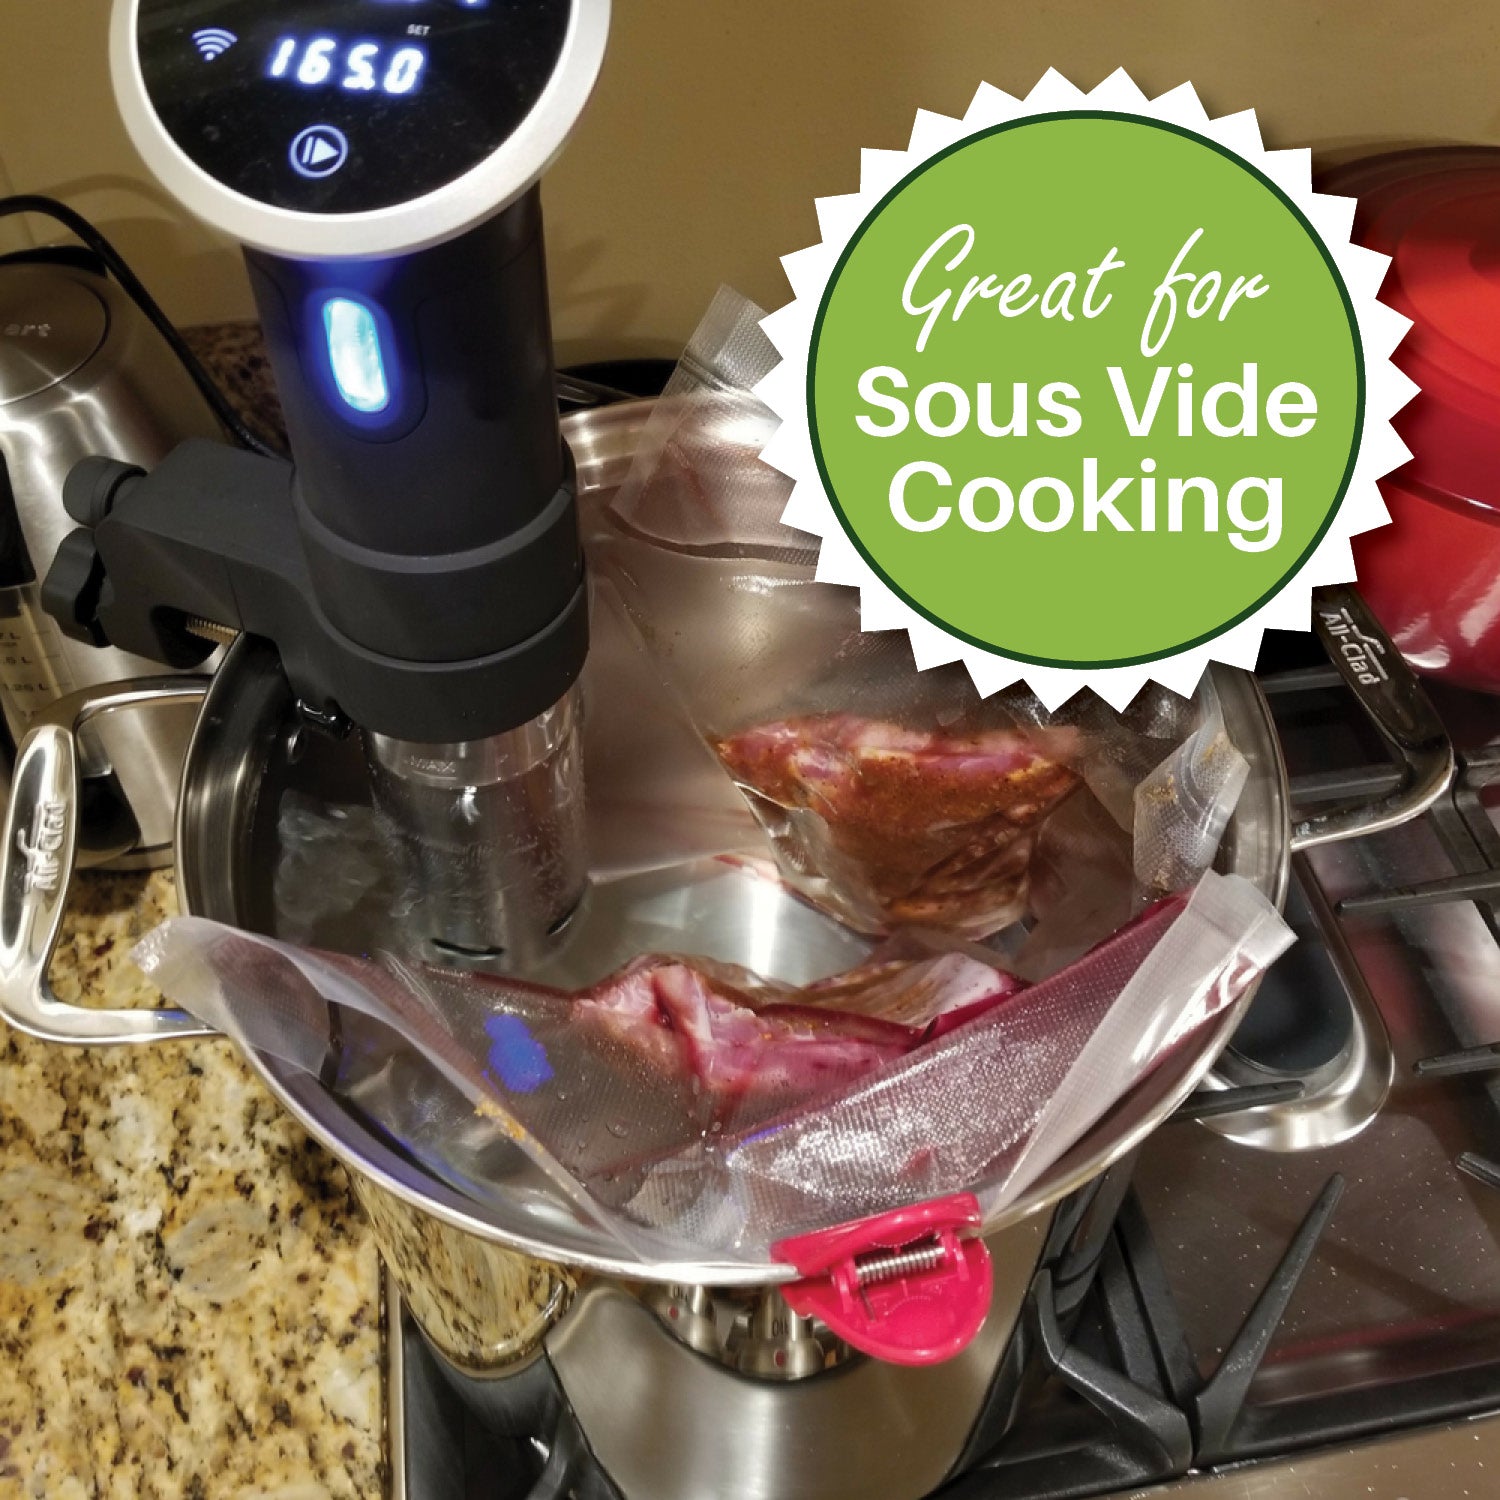 FoodVacBags are great for Sous Vide Cooking